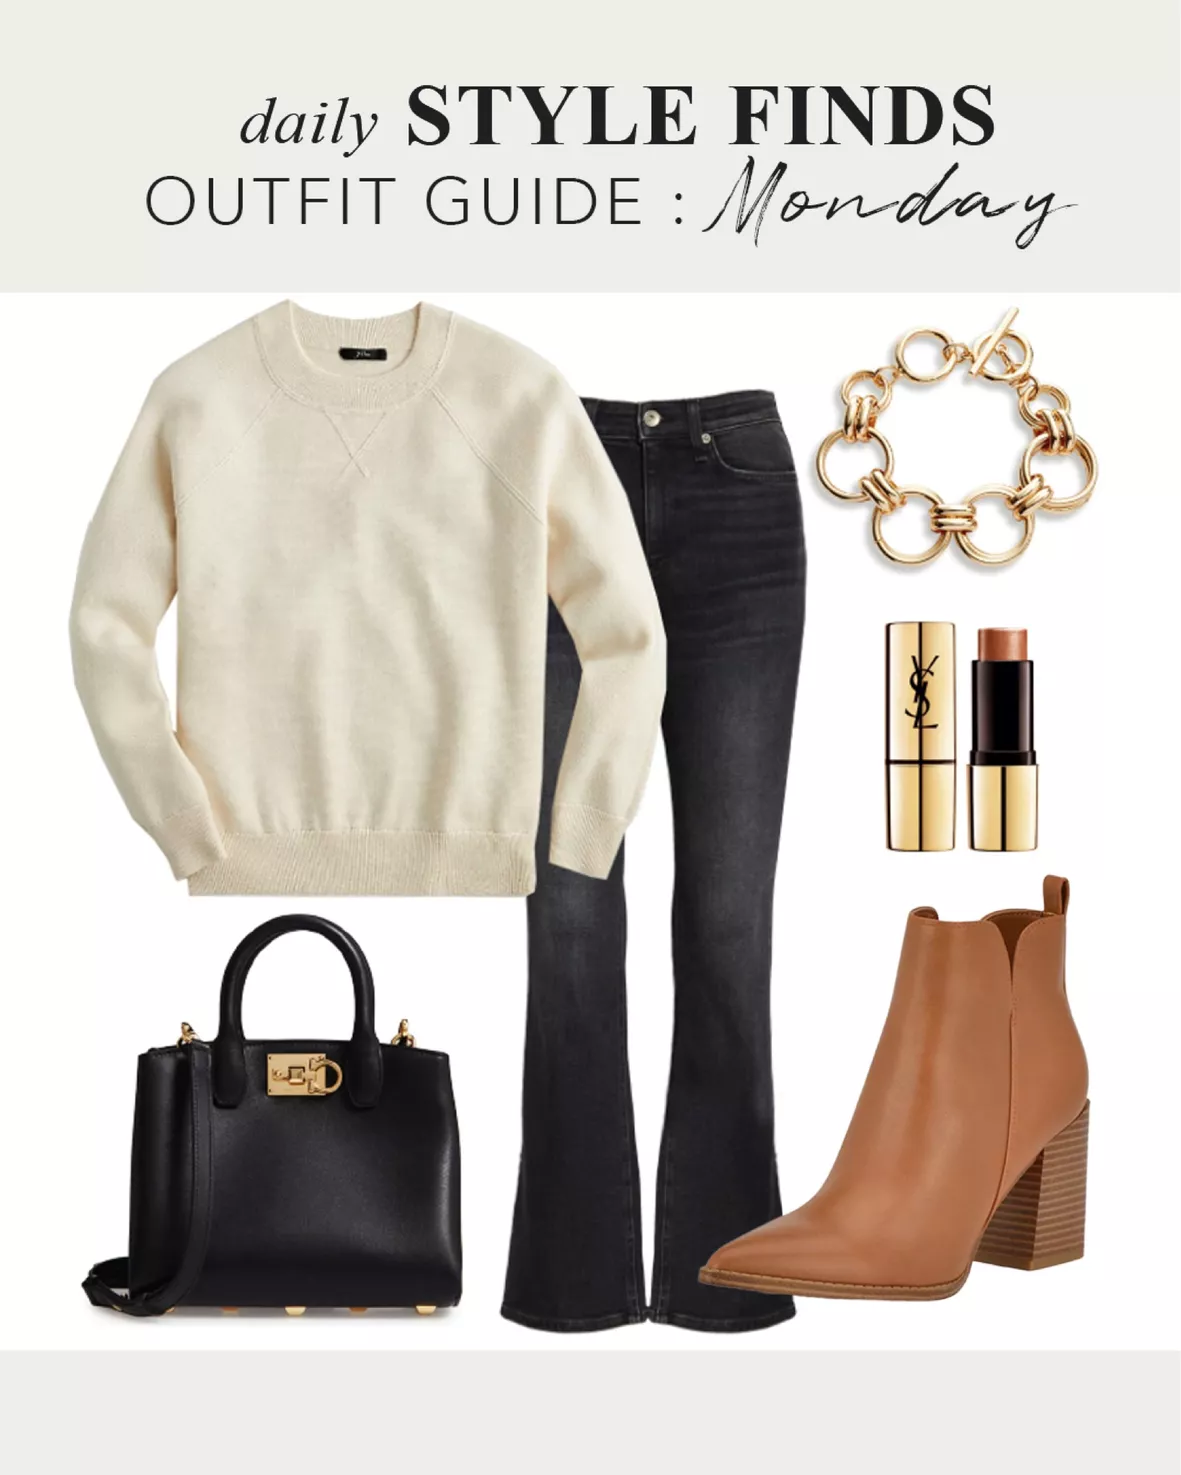 A casual black and cognac fall outfit